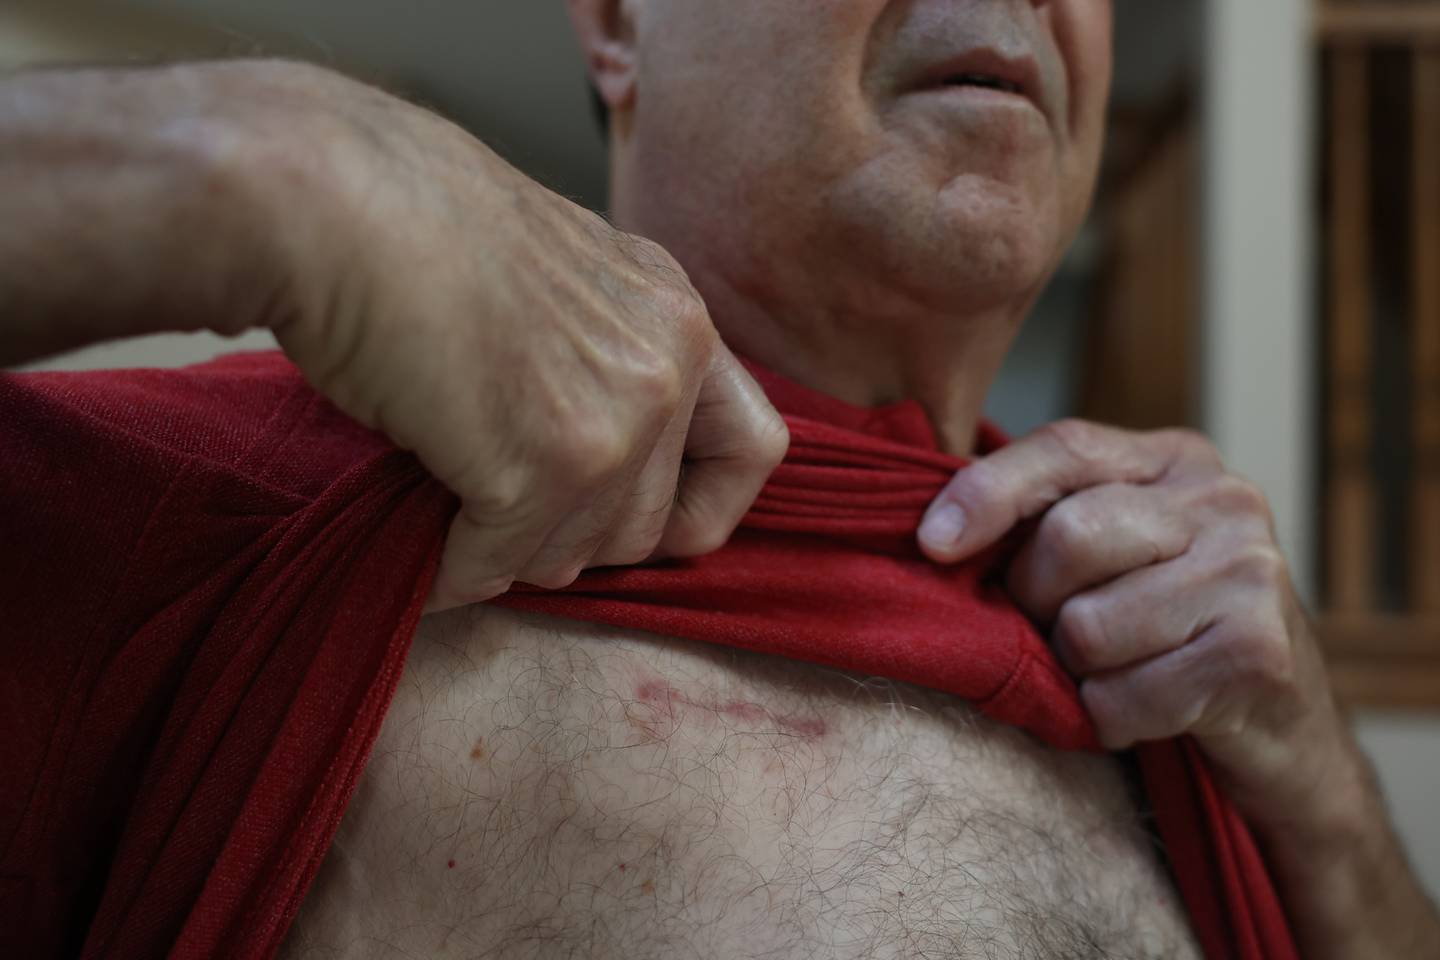 A scar is still visible where the Inspire device was inserted to help with Edward Meyer’s sleep apnea. Edward was the first to have the procedure done at Silver Cross Hospital. Wednesday, June 28, 2022 in New Lenox.